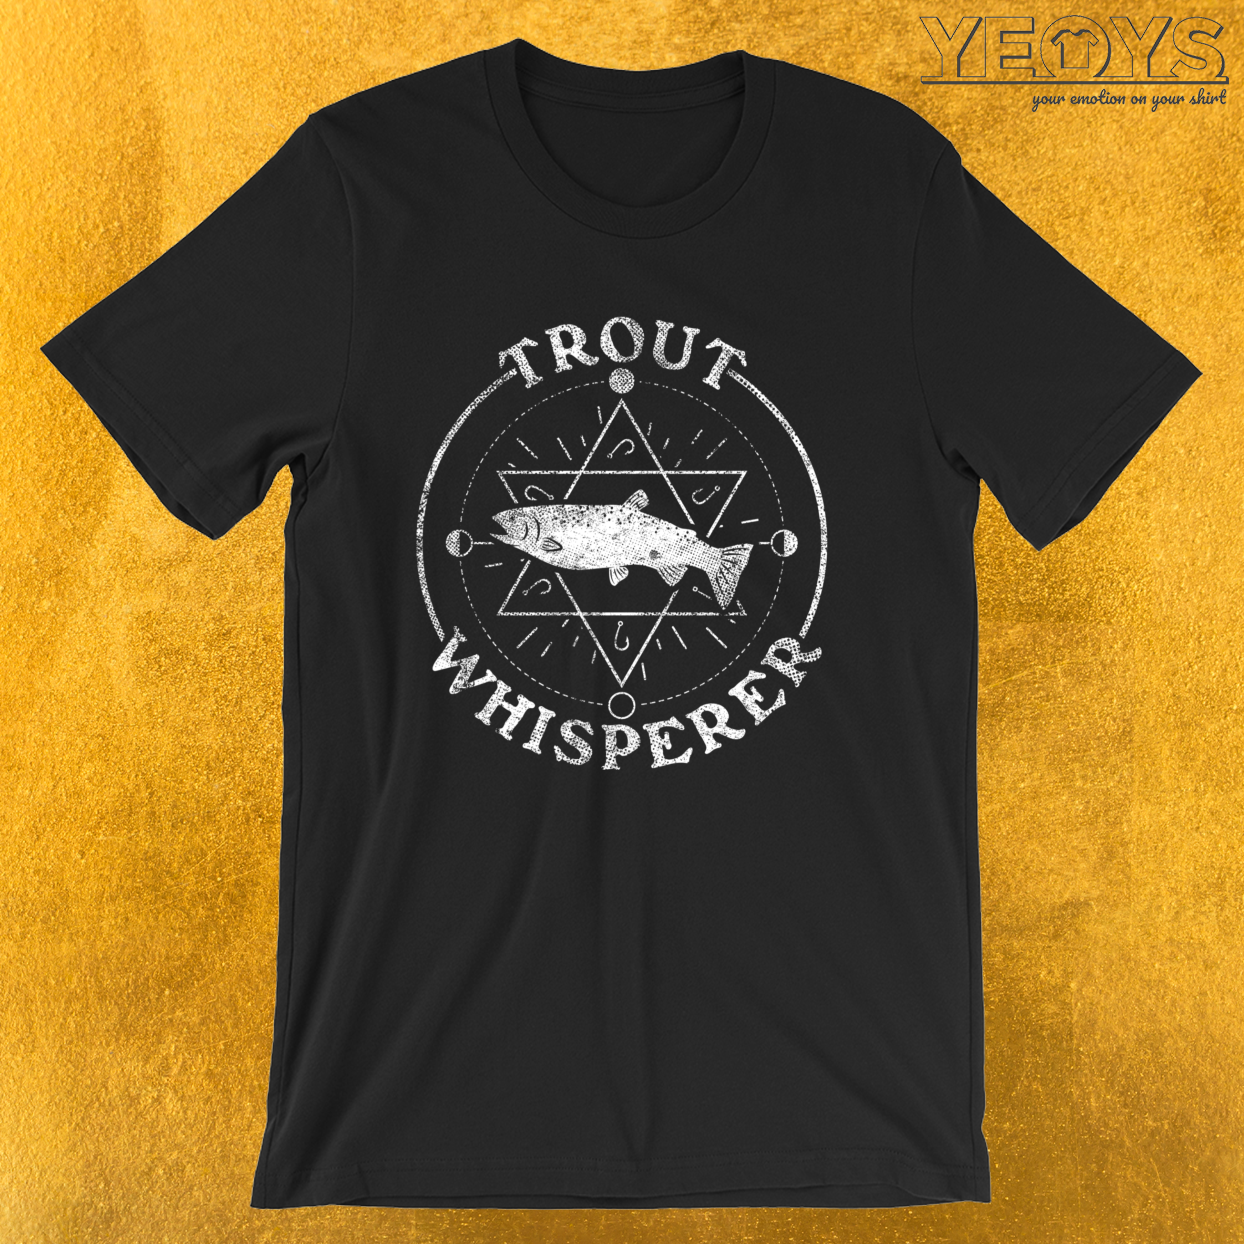 Trout Whisperer – Rainbow Trout Tee